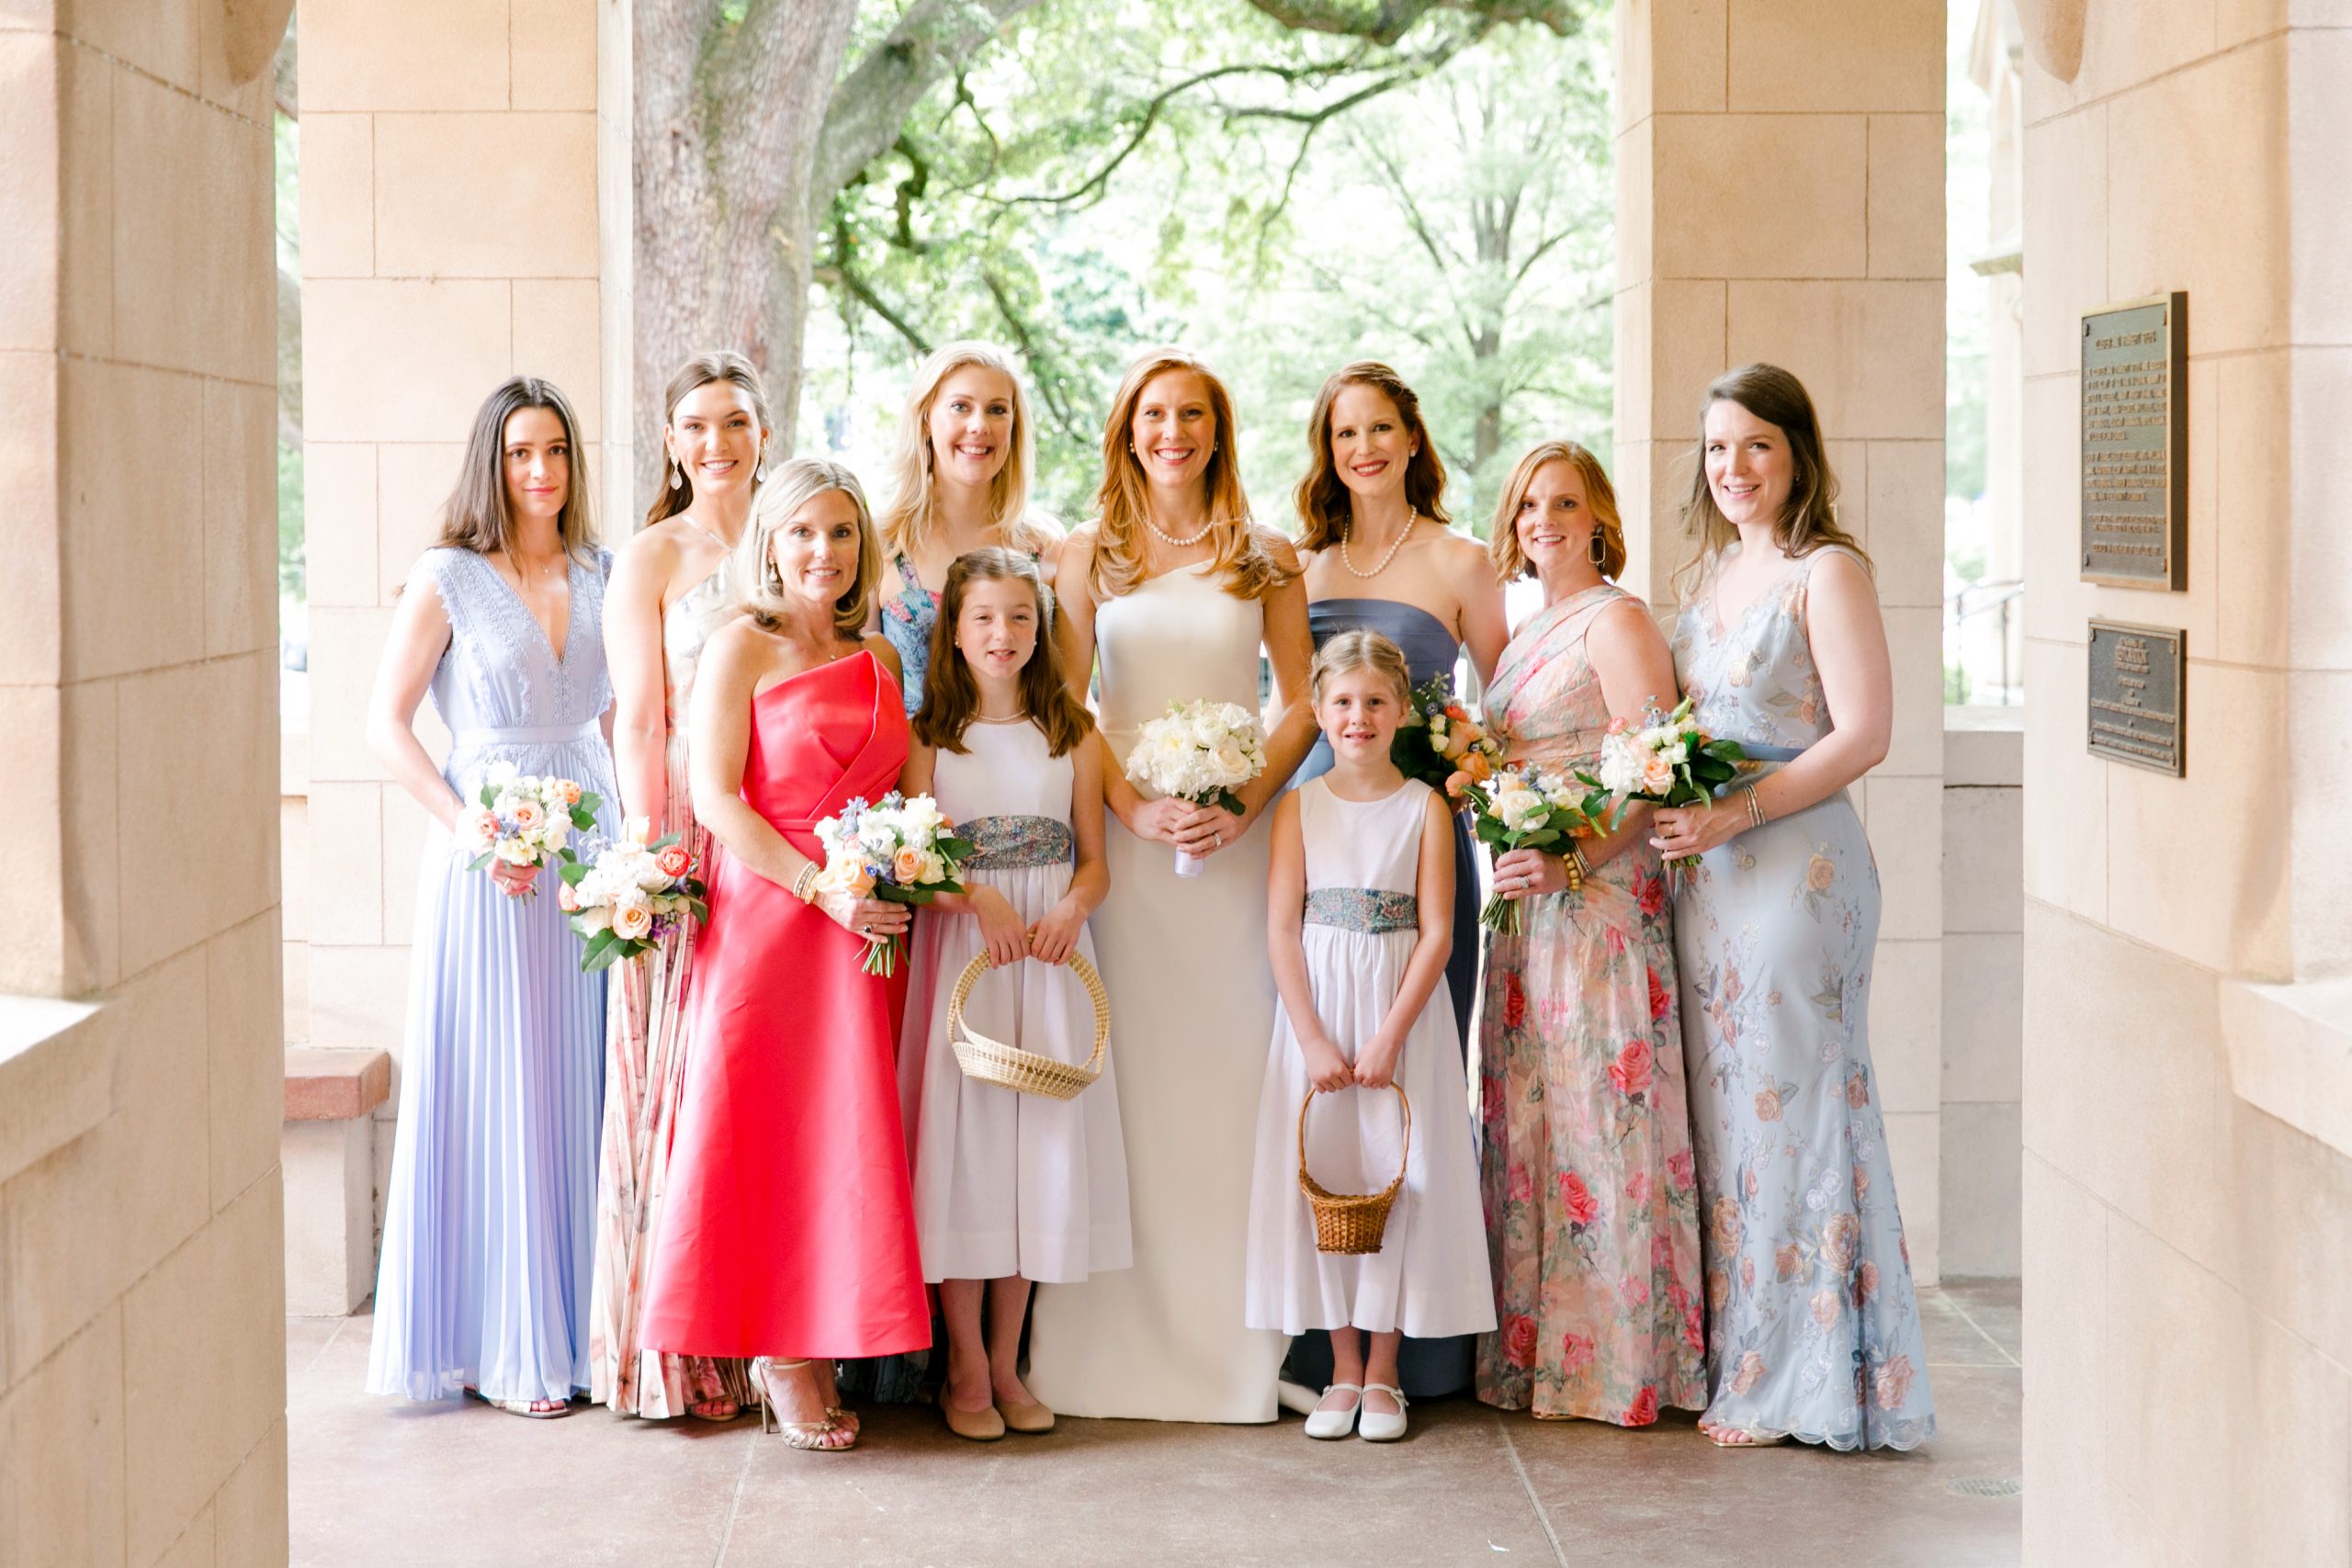 Bride-to-be- Katherine Dyke and her mother and wedding planner, Melanie Crawford, chose a color scheme of coral and French blue for Katherine’s spring 2021 wedding to William Buyck. Katherine wanted each of her attendants to wear different dresses and feel comfortable. Some dresses were floral, others were solid, and all were different styles. Bridesmaids Allison Courtin, Solveig Entwistle, Adele Grimsley, Mary Caroline Bubnovich, bride Katherine Buyck, Margaret Clay, Trenholm Hardison, and Stephanie Anklin. Flower girls Liddy Grimsley and Perry Dyke. 